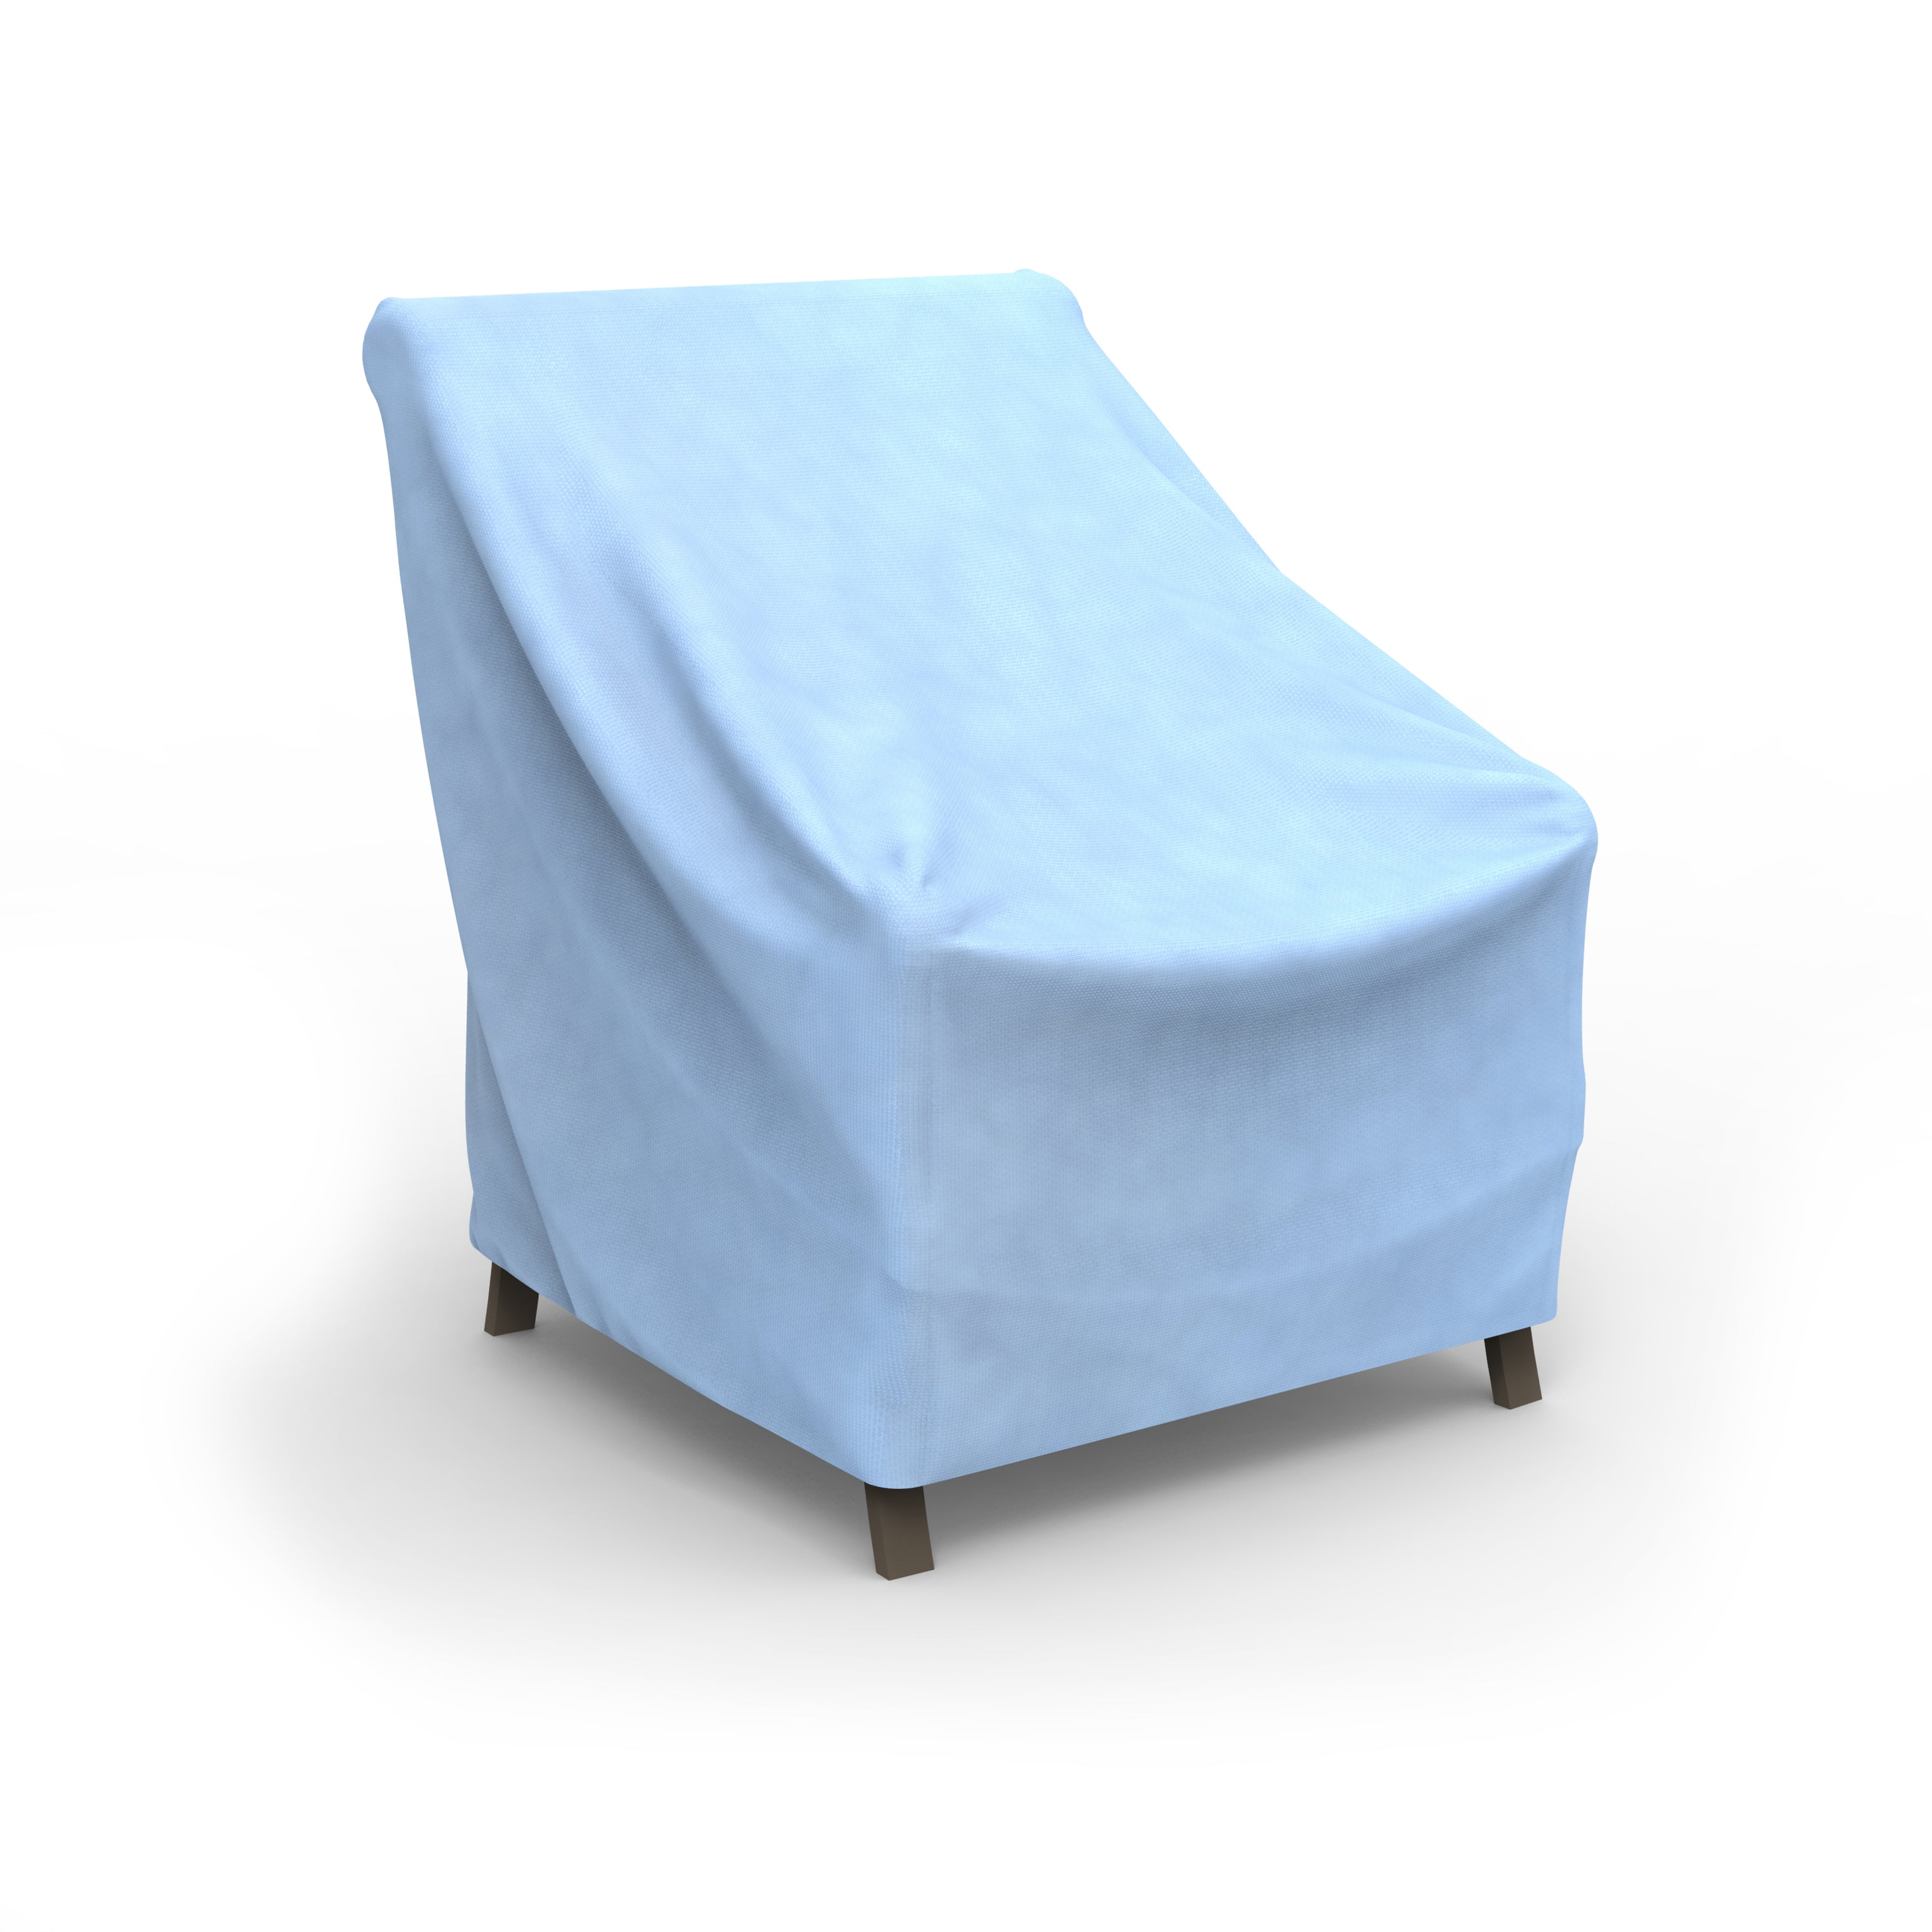 Budge Small Blue Patio Outdoor Chair Cover, All-Seasons ...